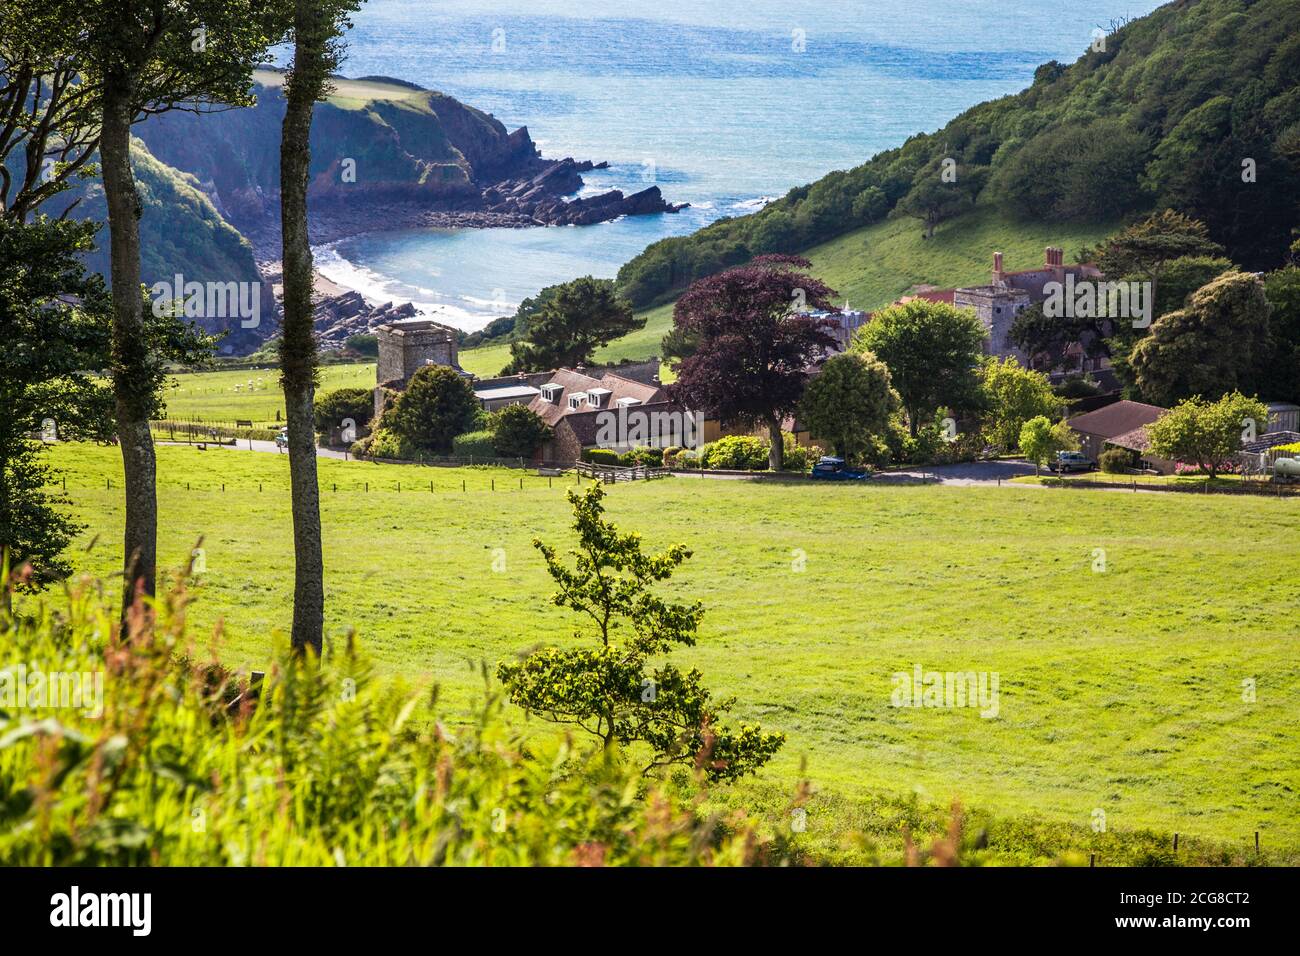 View over Lee Bay near Lynton and Lynmouth, north Devon, England, UK Stock Photo